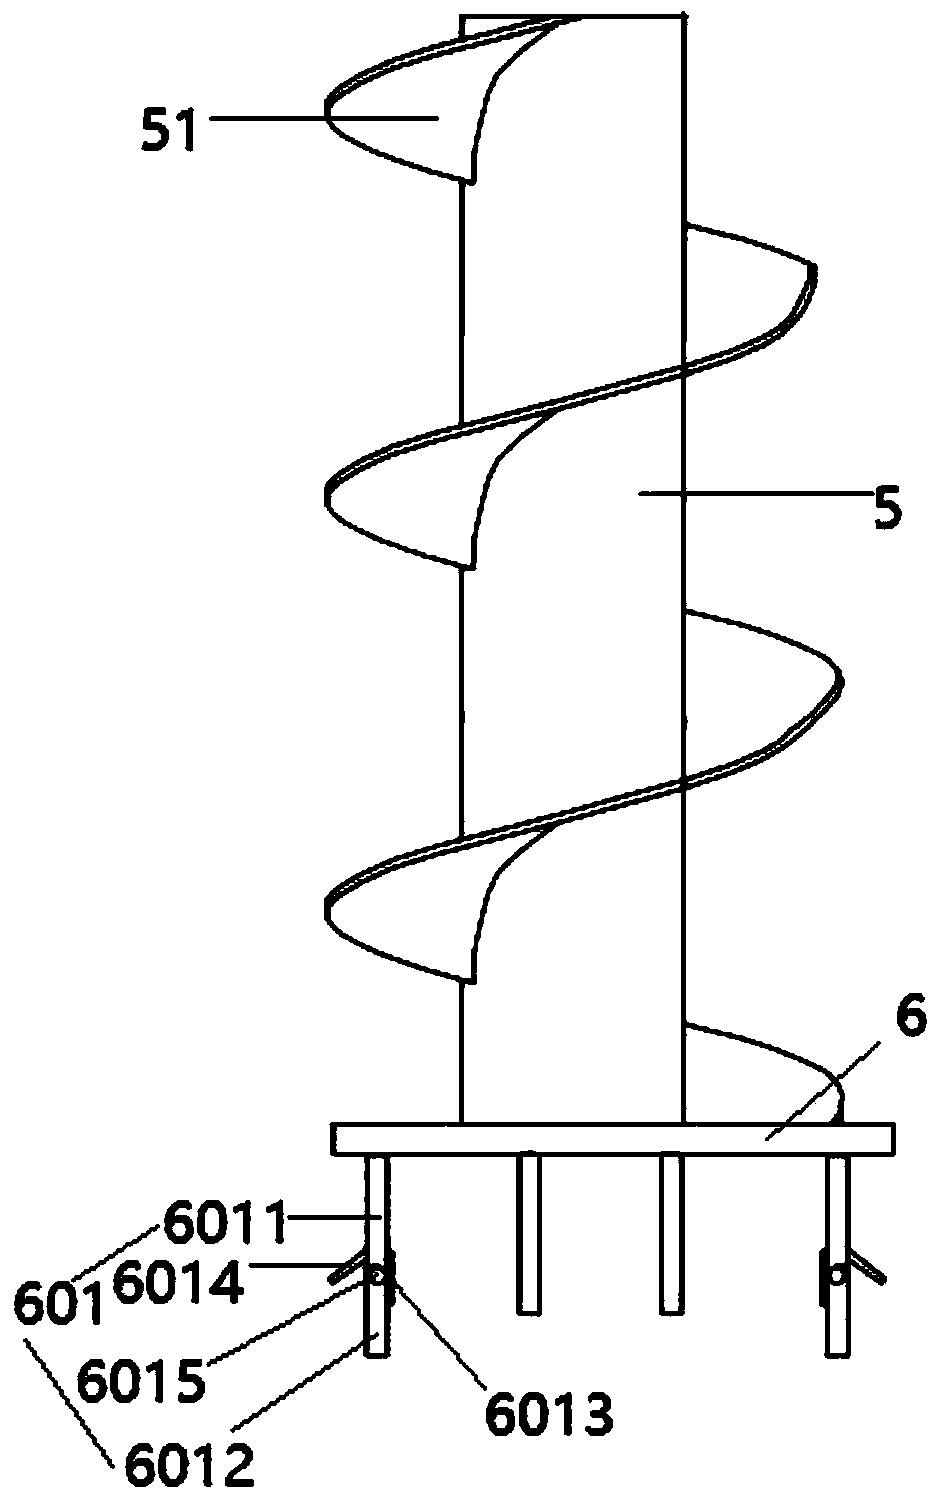 Tree planting system and control method